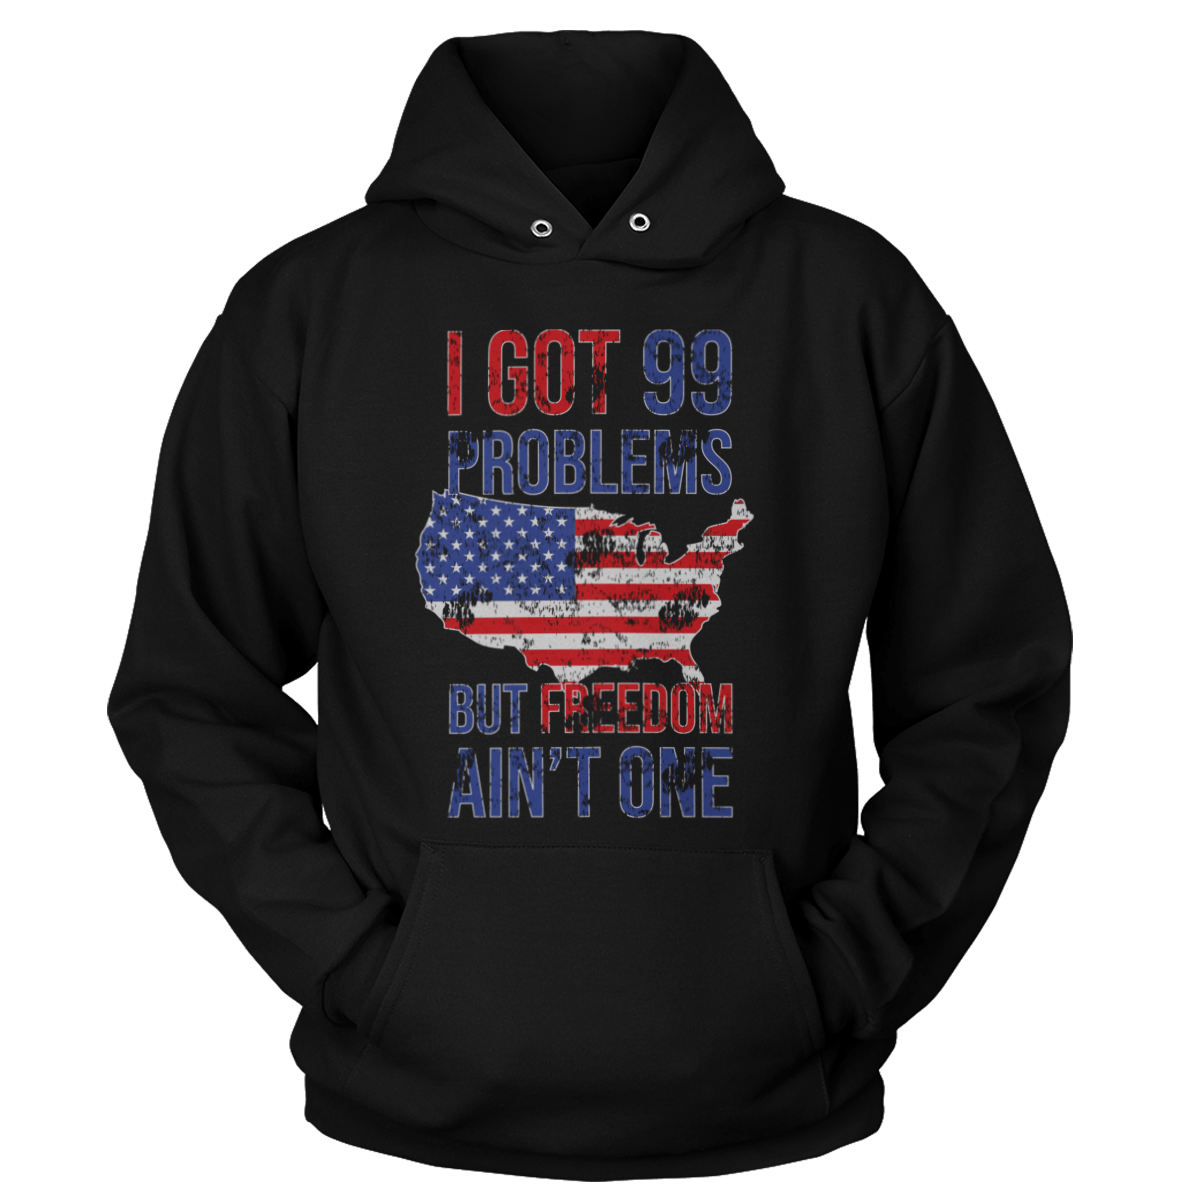 T-shirt Unisex Hoodie / Black / S I Got 99 Problems But Freedom Ain't One